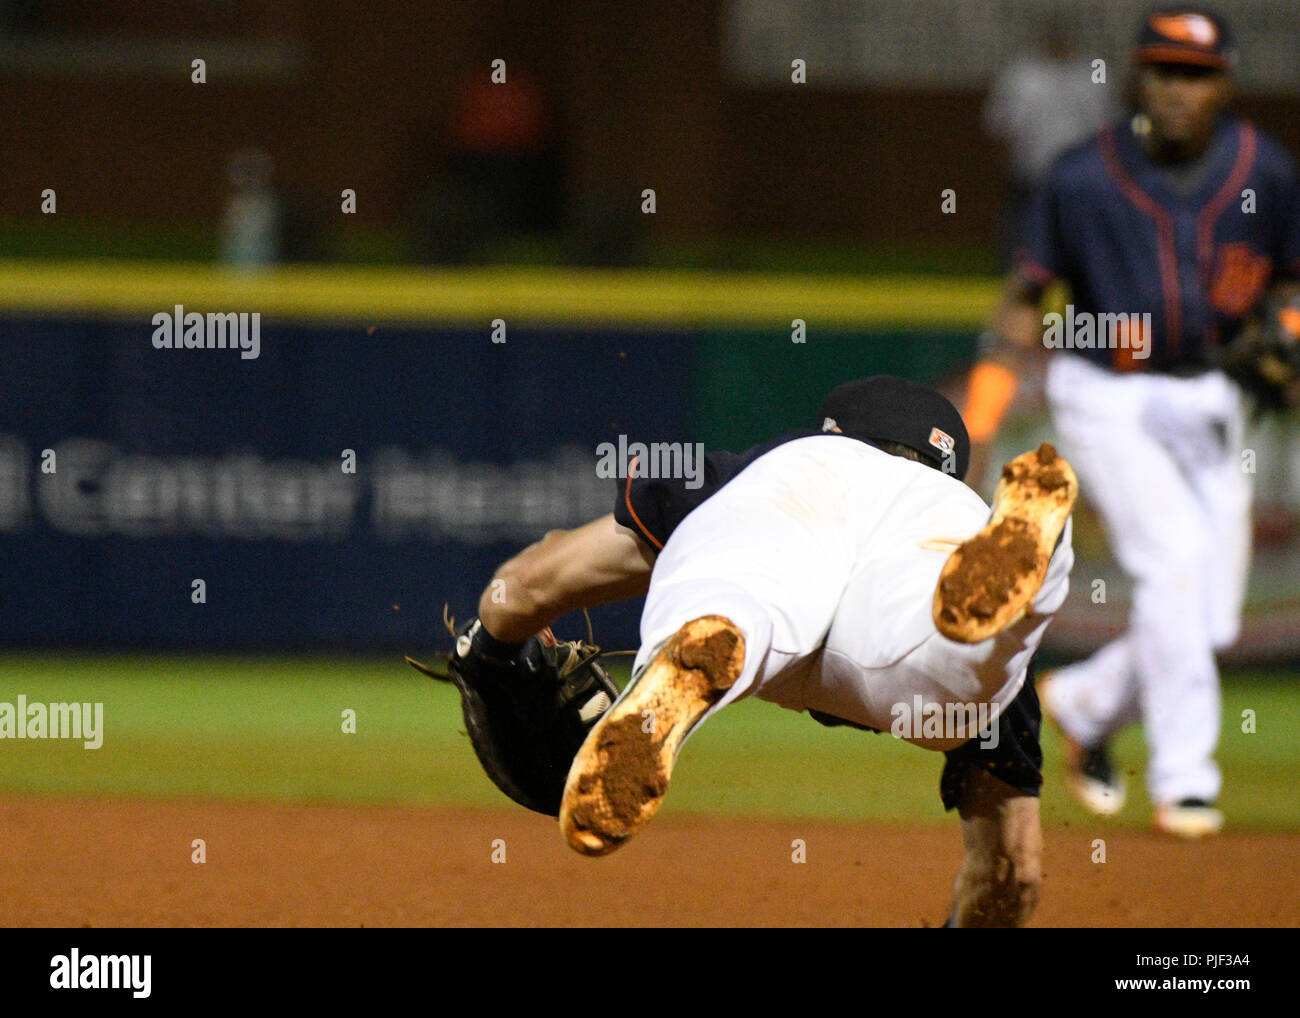 The Second Round. 6th Sep, 2018. USA Bowling Green Hot Rods first baseman Jim Haley (20) makes a diving catch during a Mid West League series between the Lansing Lugnuts and the Bowling Green Hot Rods in Bowling Green, KY st Bowling Green Ballpark. Hot Rods sweep Lugnuts and advance to the second round. (Mandatory Photo Credit: Steve Roberts/CSM) Credit: csm/Alamy Live News Stock Photo